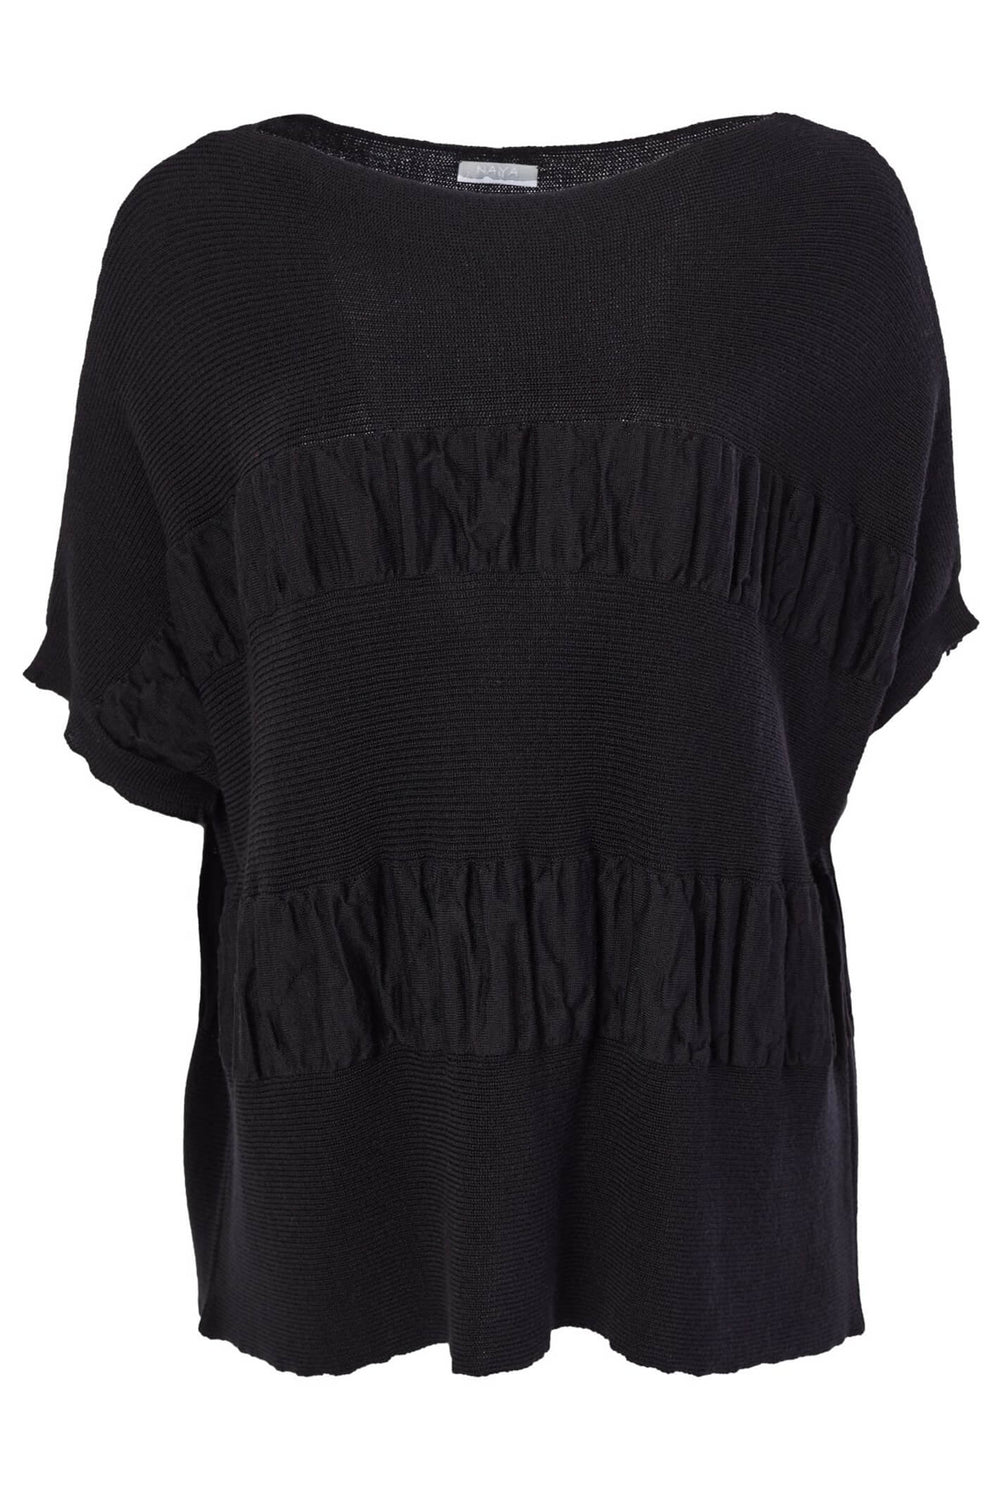 Naya NAW23 208 Black Knitted Short Sleeve Jumper - Experience Boutique